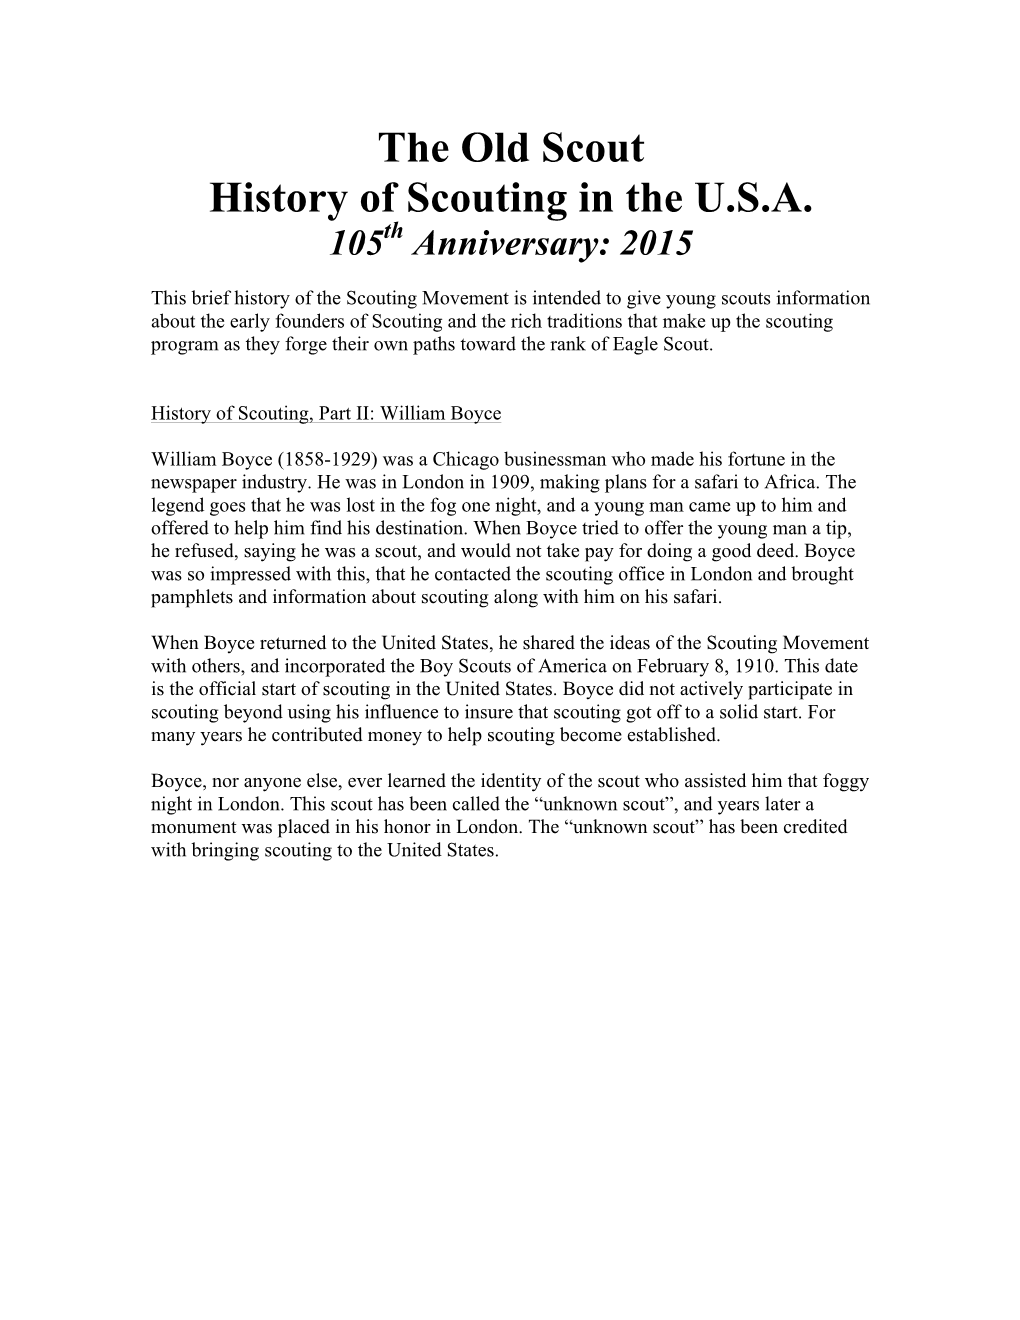 The Old Scout History of Scouting in the U.S.A. 105Th Anniversary: 2015